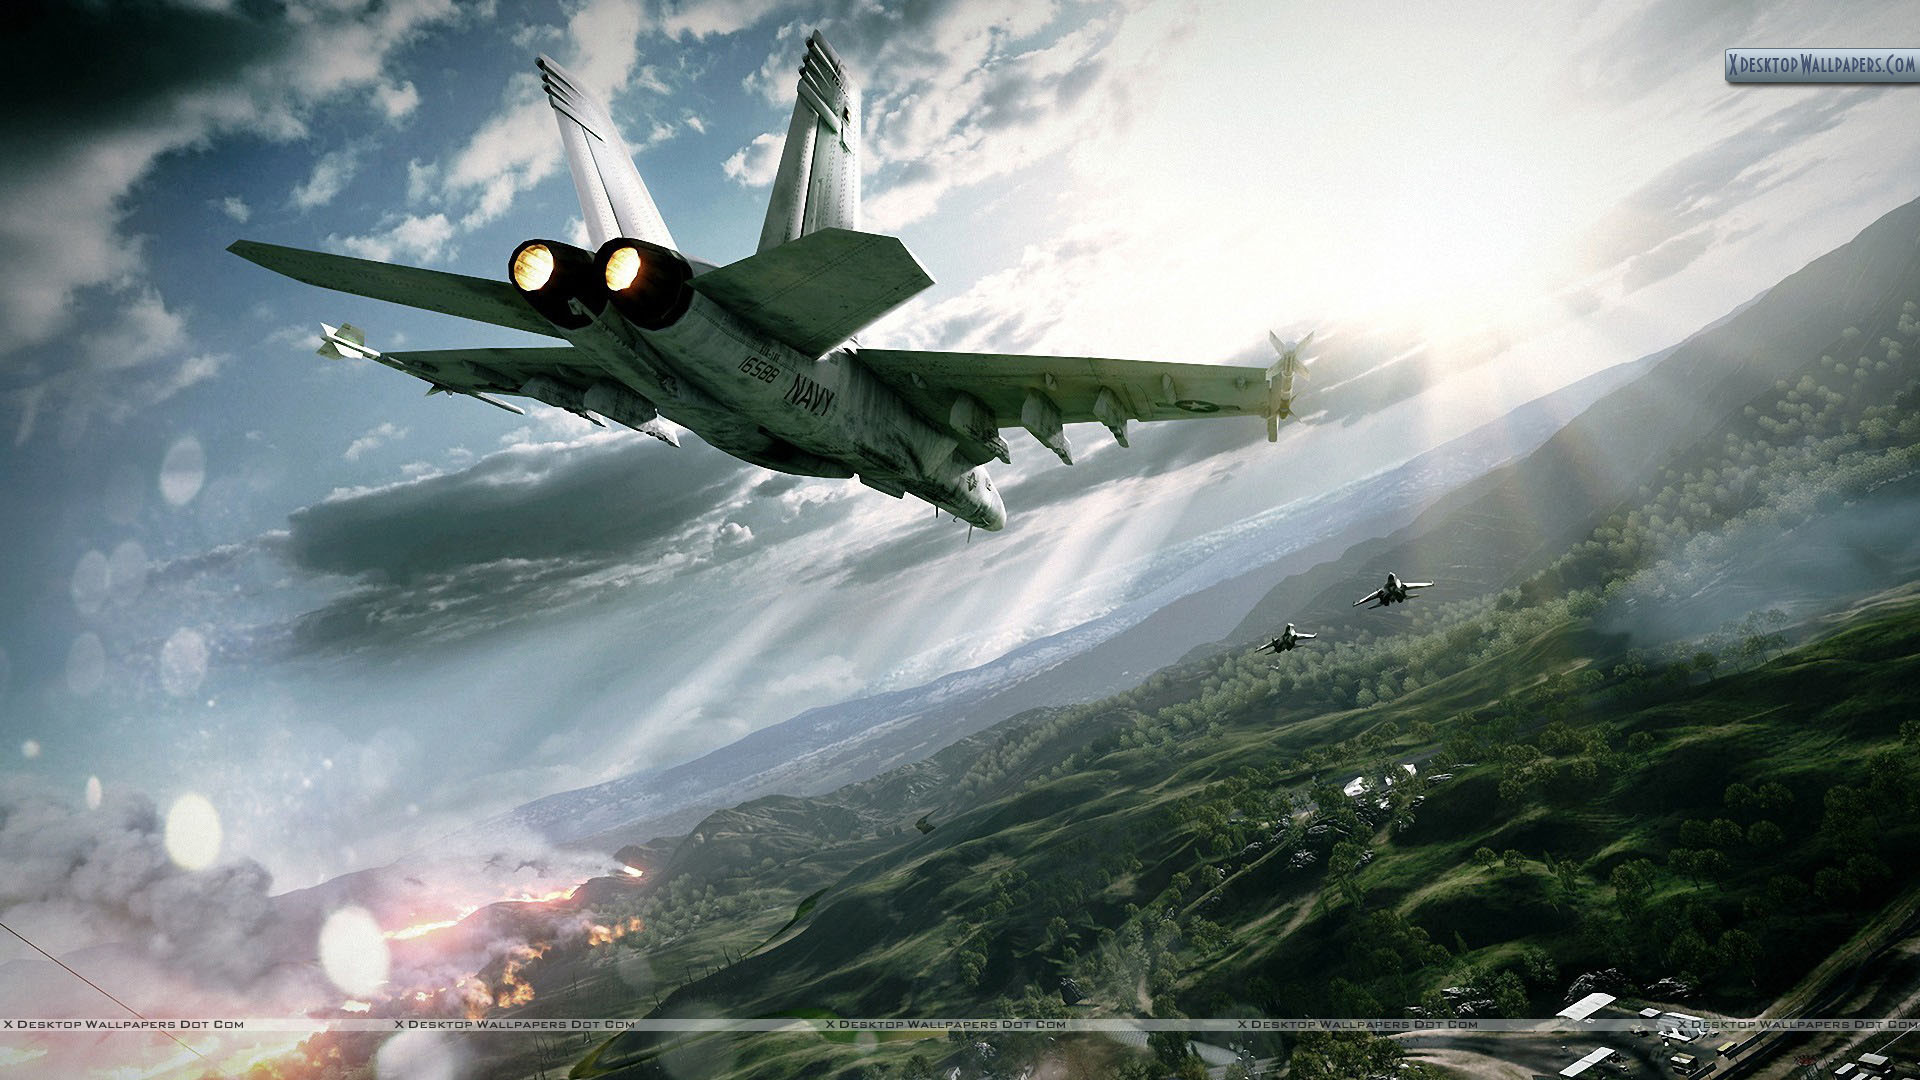 1920x1080 You are viewing wallpaper titled "Battlefield 3 – Fighter Plane" ...